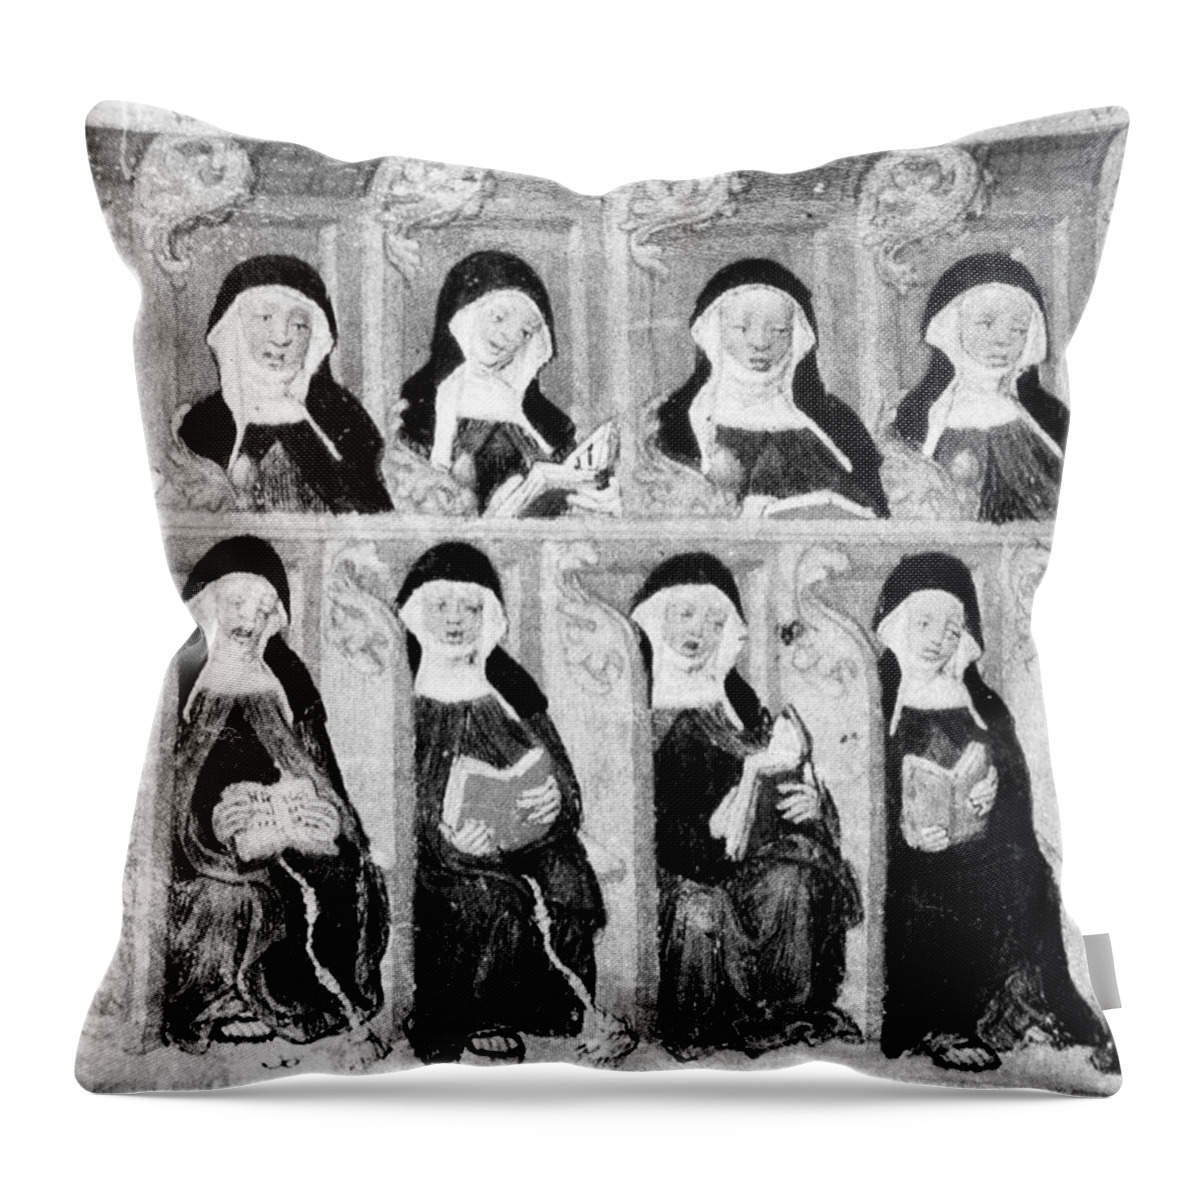 1430 Throw Pillow featuring the photograph Franciscan Nuns by Granger